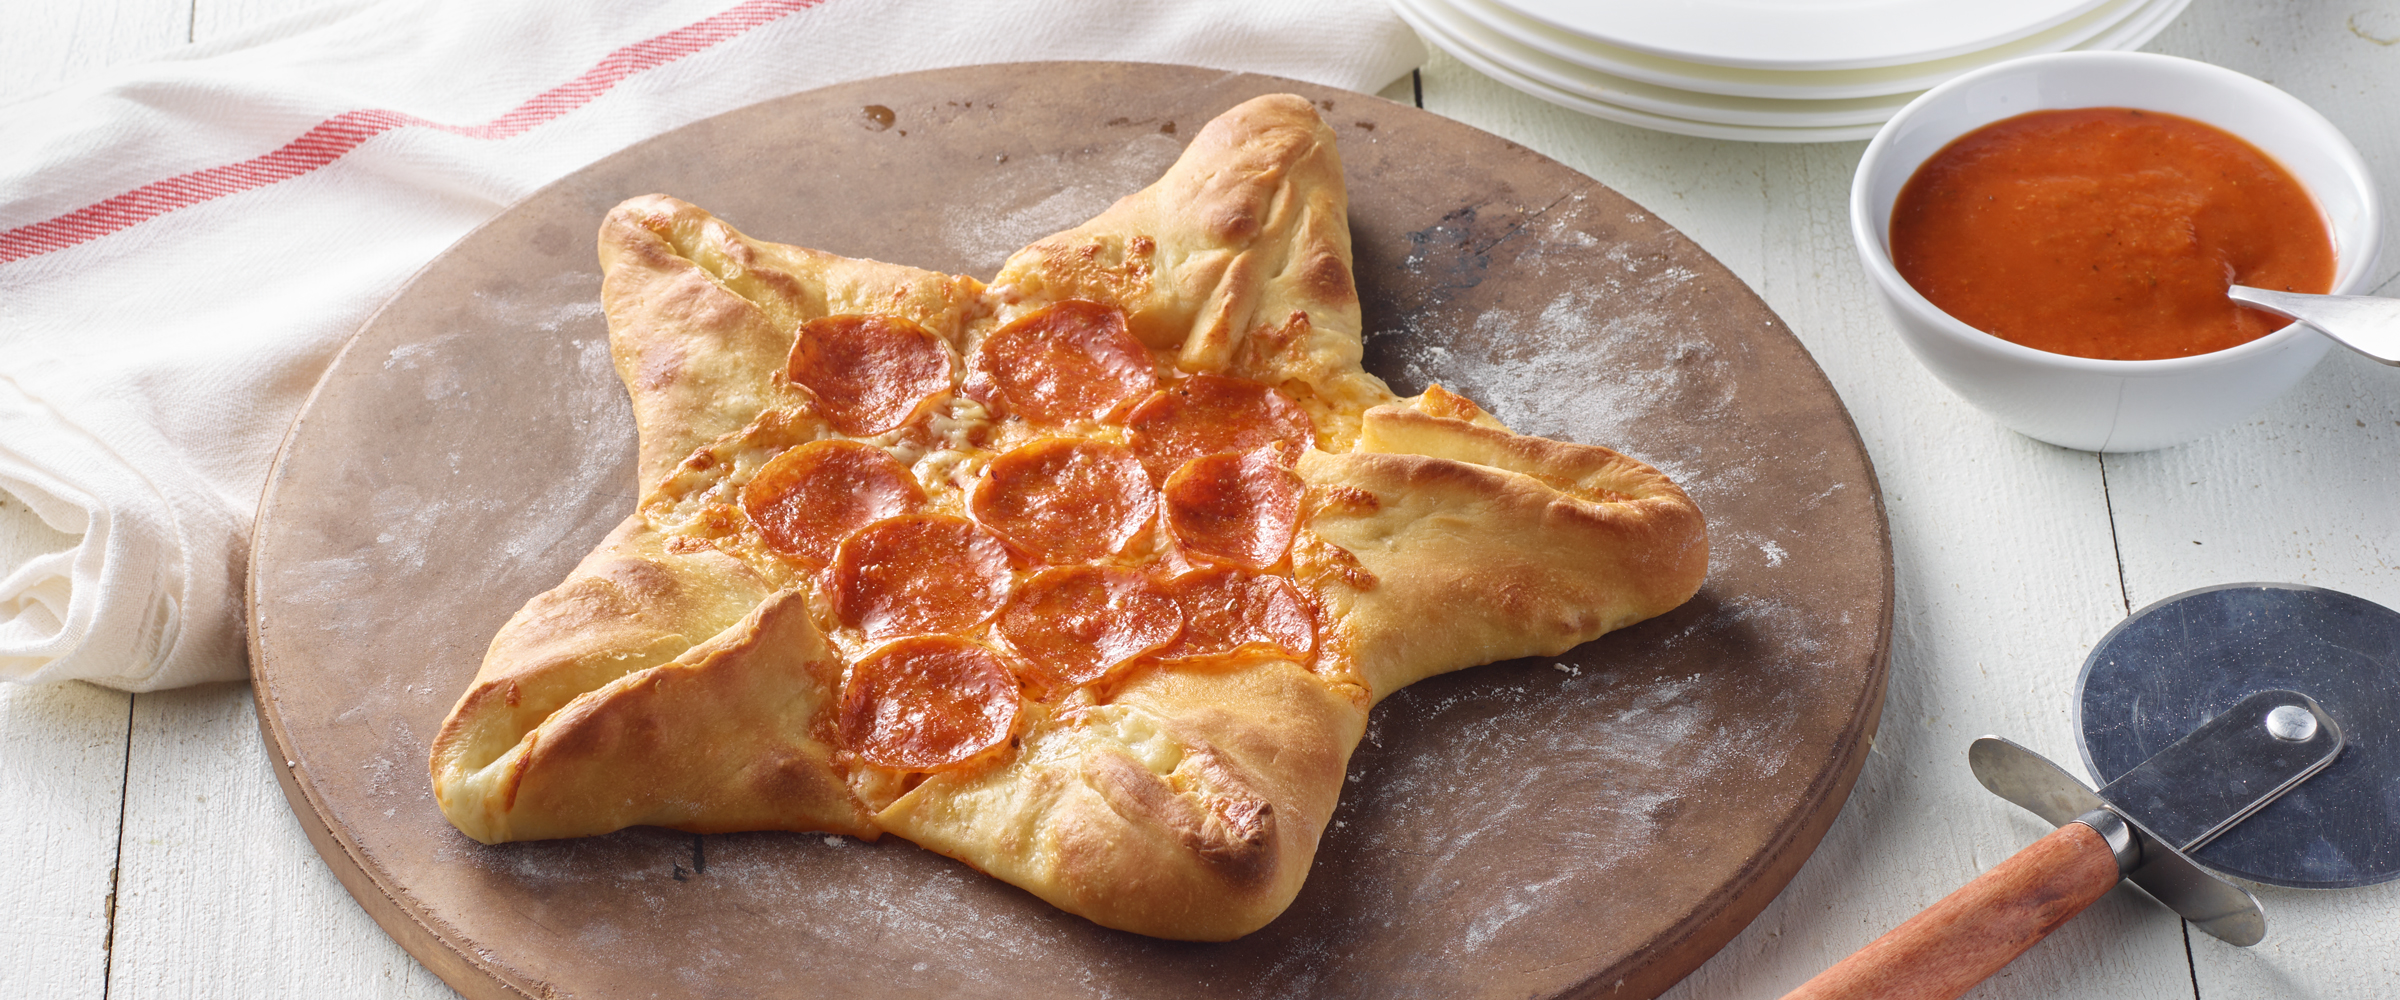 Transform your movie night with this whimsical Star-Shaped Pepperoni Pizza! Crafted pizza dough folded into the shape of a star, filled with gooey mozzarella cheese, pizza sauce and zesty HORMEL® Pepperoni, perfectly arranged to create a visual and taste sensation. Gather the family, dim the lights, and embark on a movie night adventure with our Star-Shaped Pepperoni Pizza